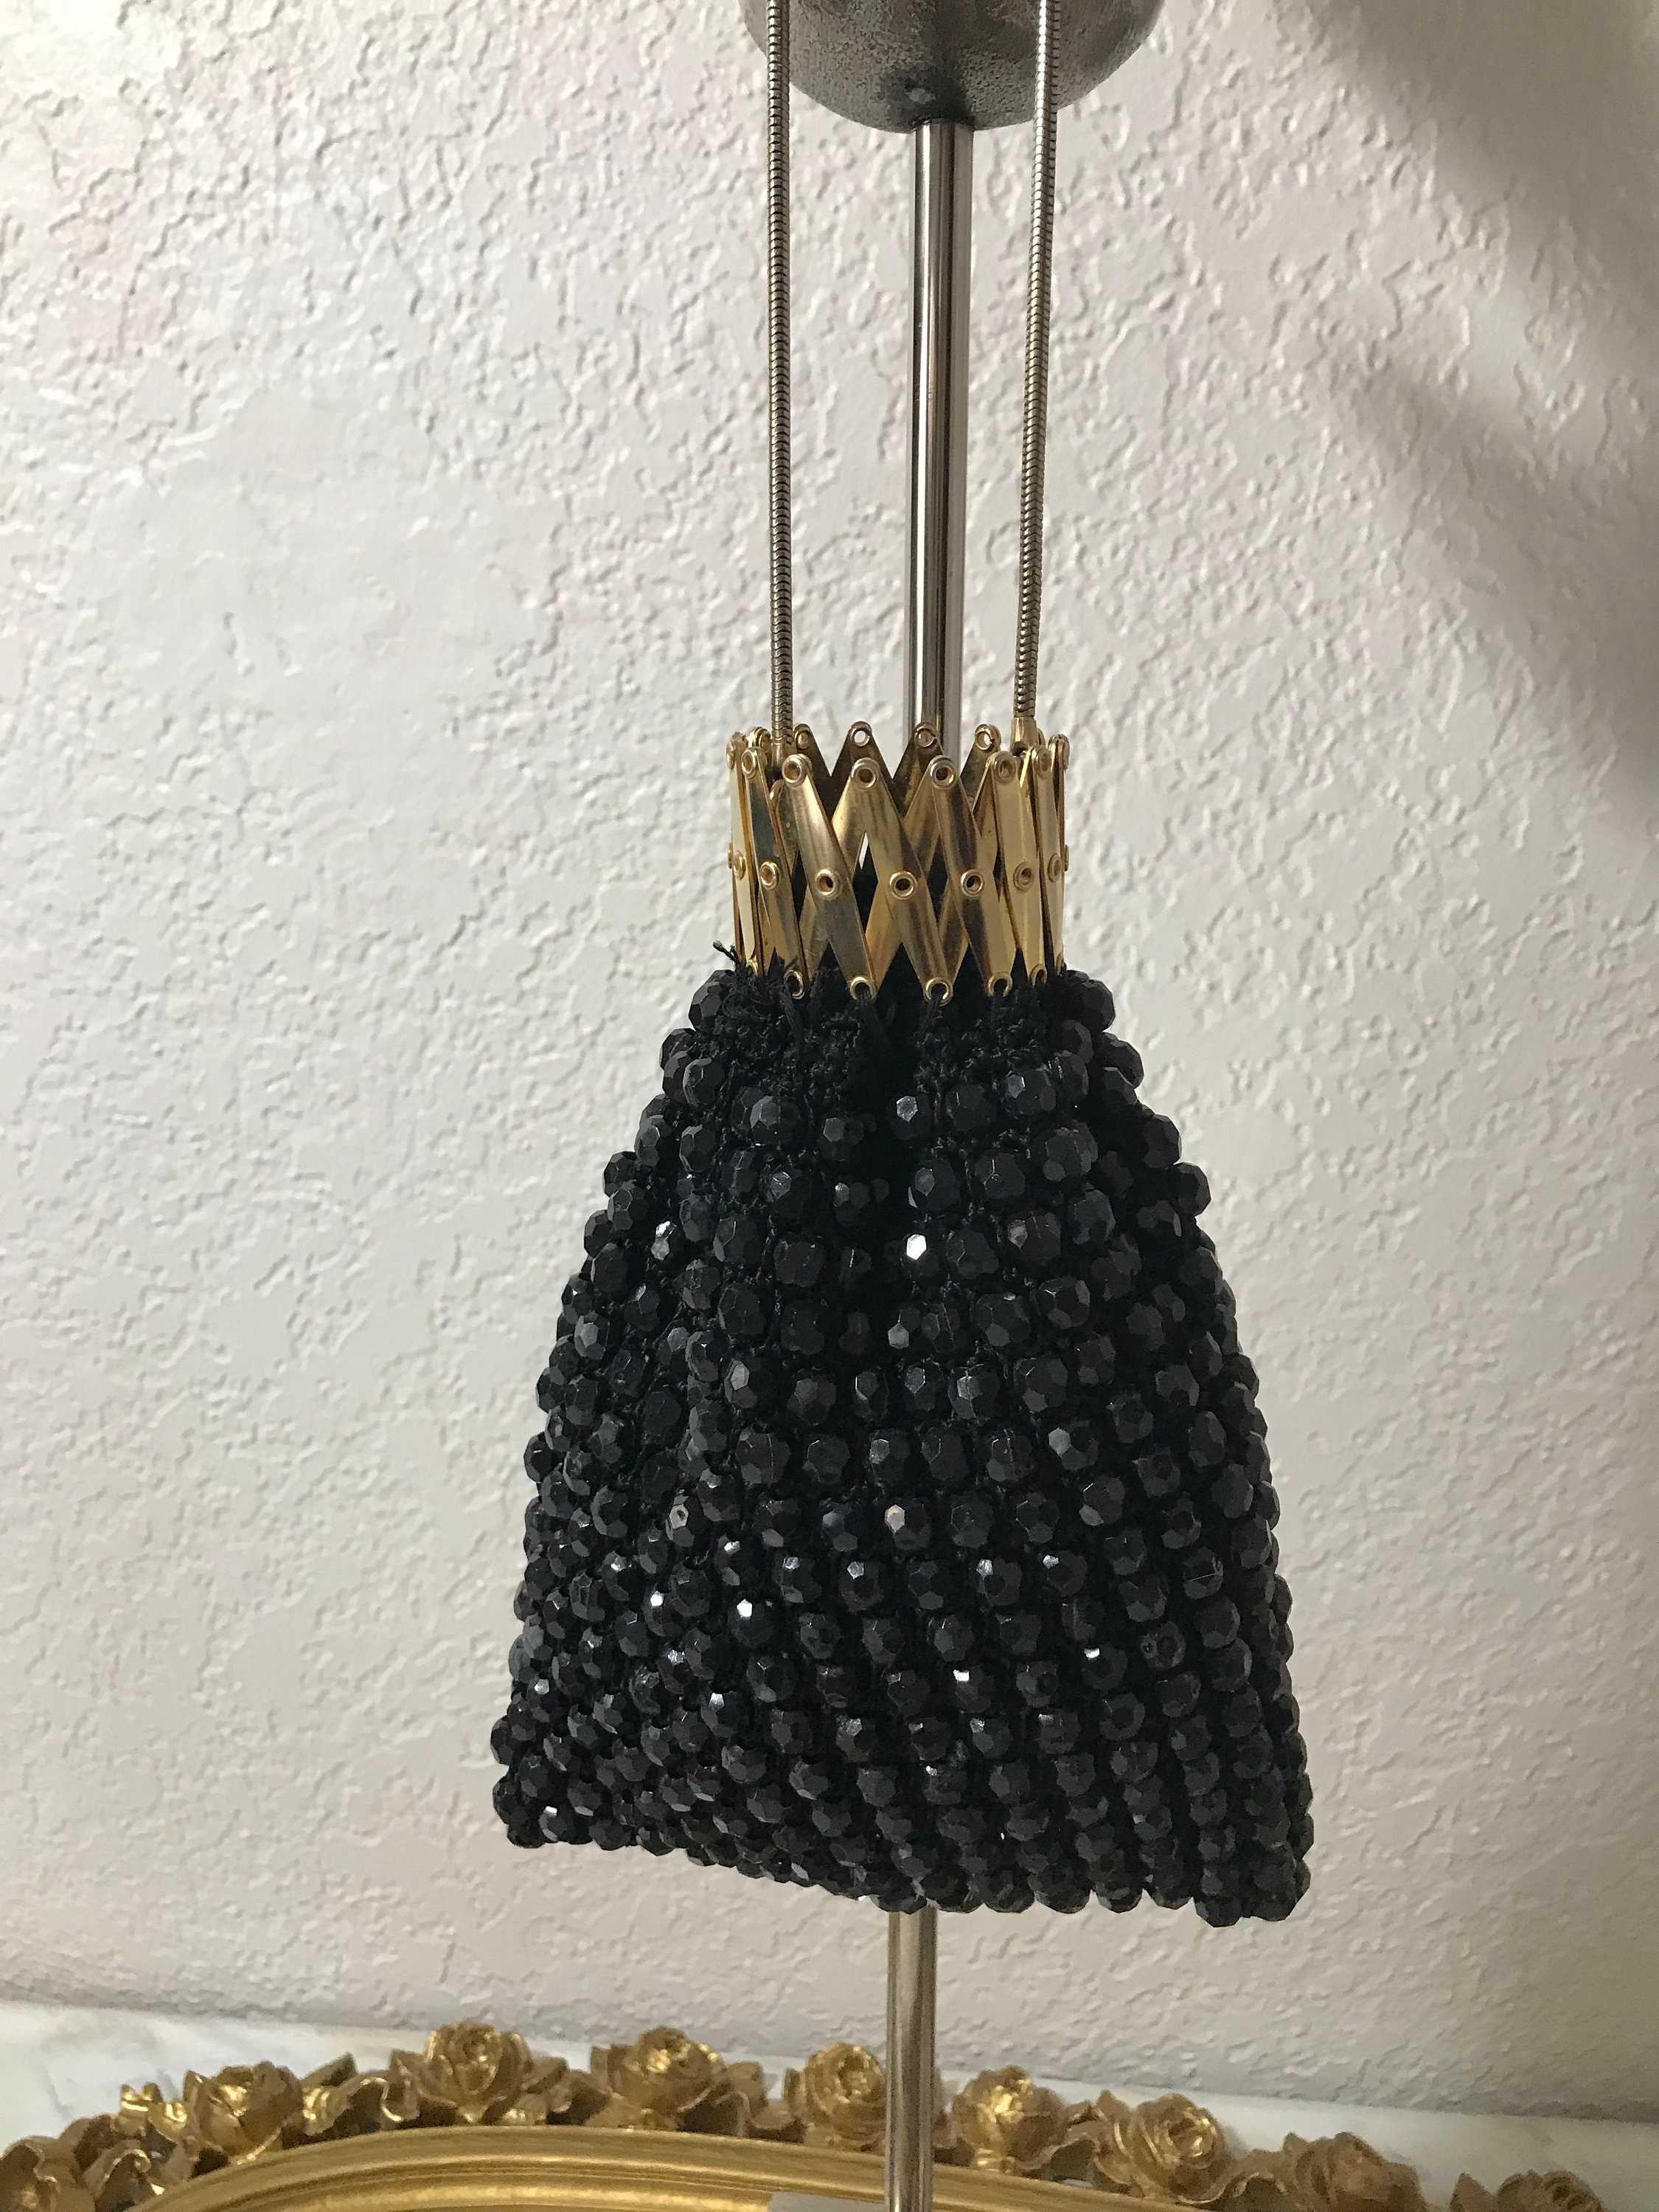 Vintage Black Beaded Handbag or Clutch, Pristine Condition, Hand Made in Japan with Italian Glass Beads, Sarne Import, 1960s